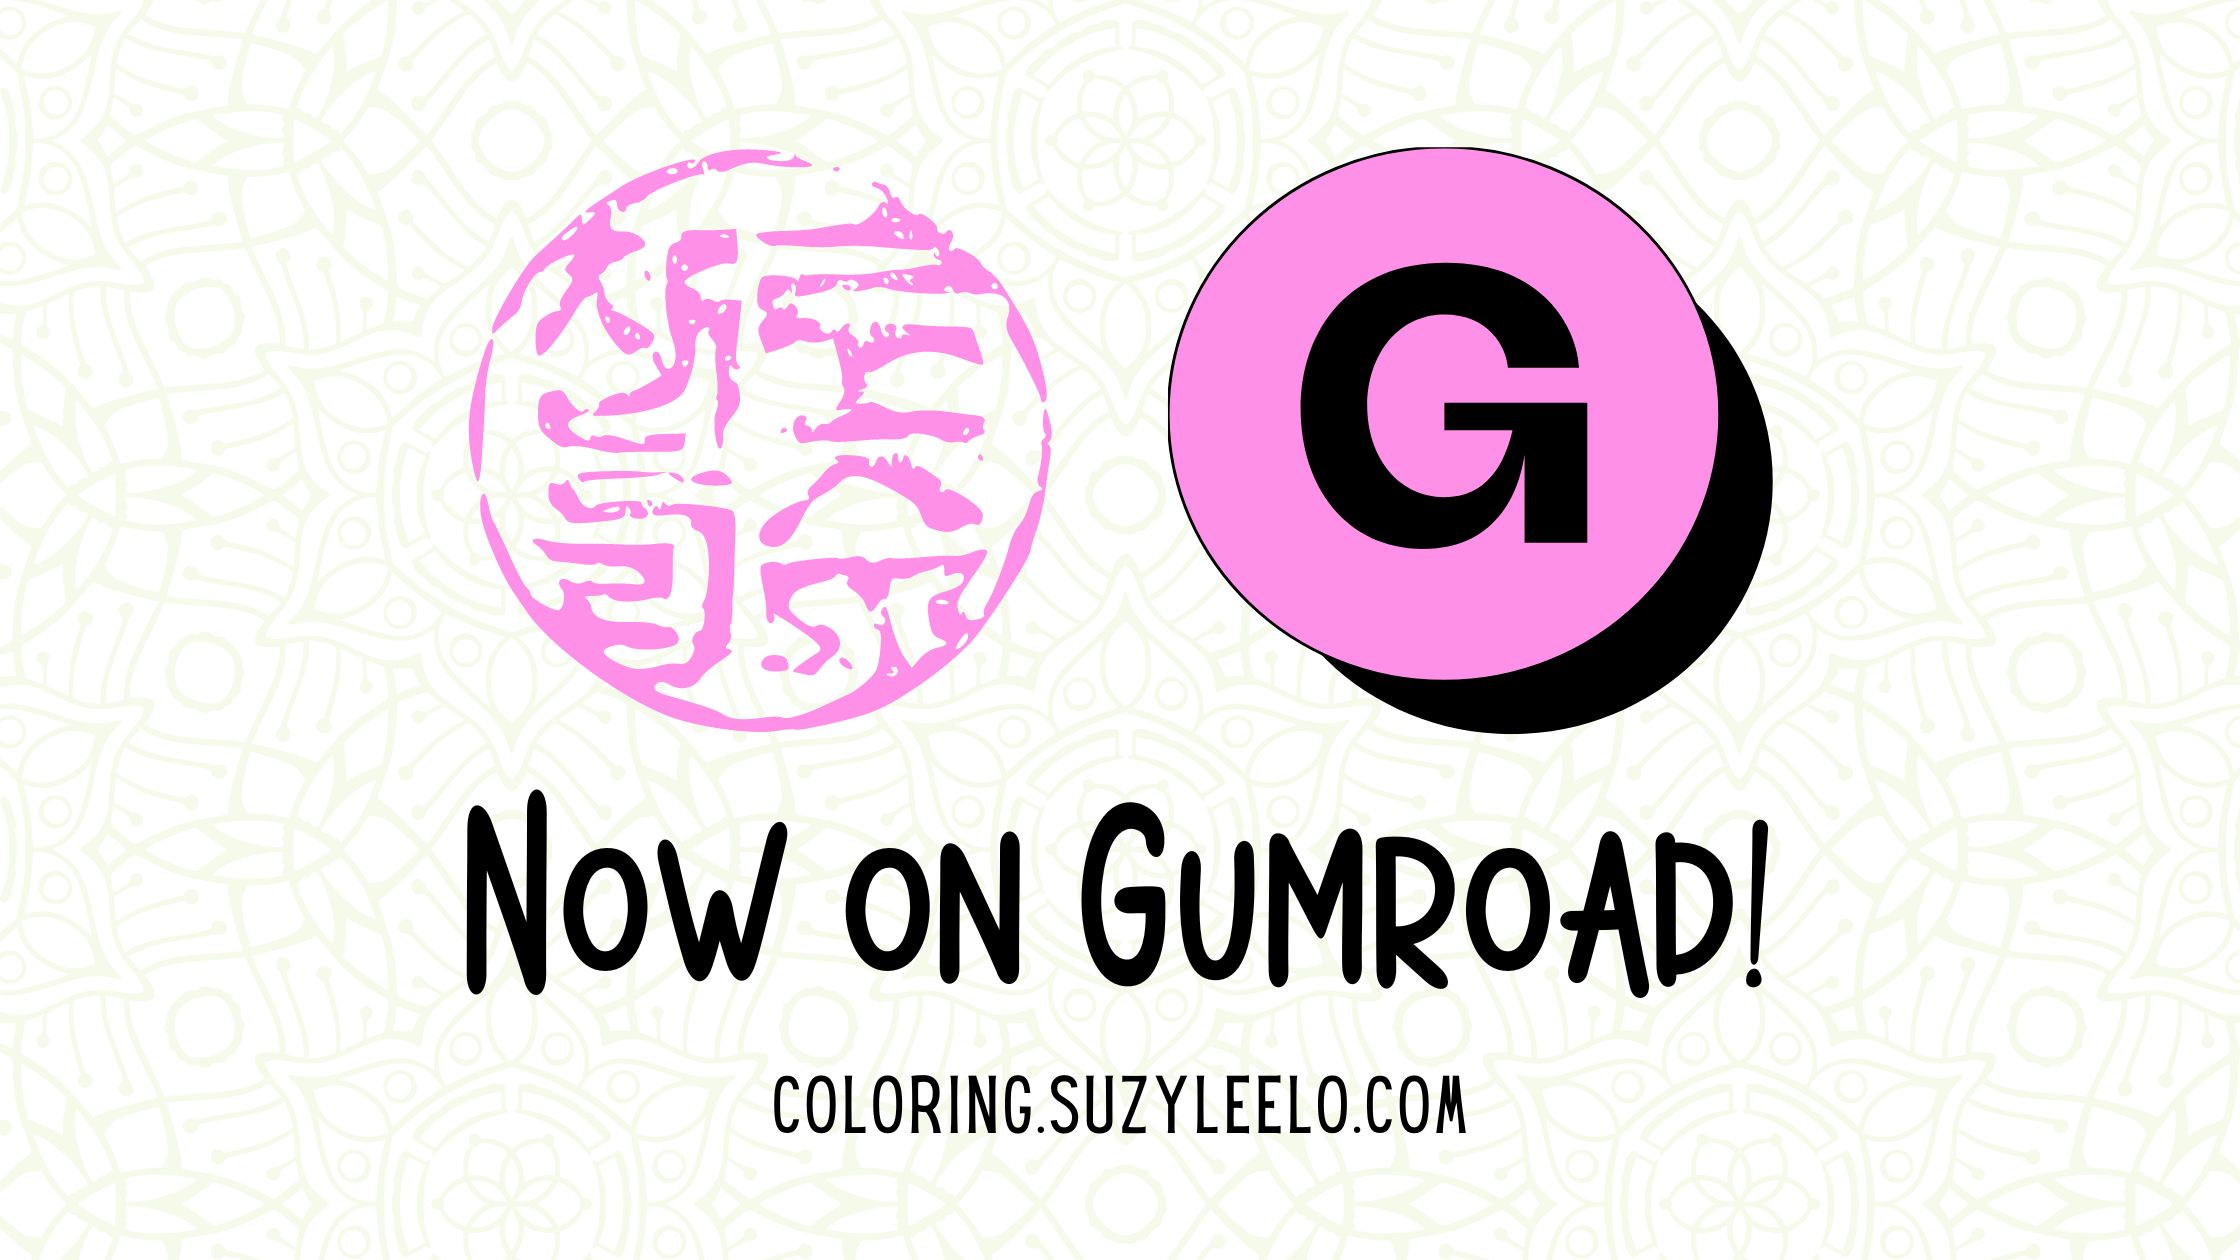 Coloring Pages by Suzy LeeLo - Now on Gumroad!